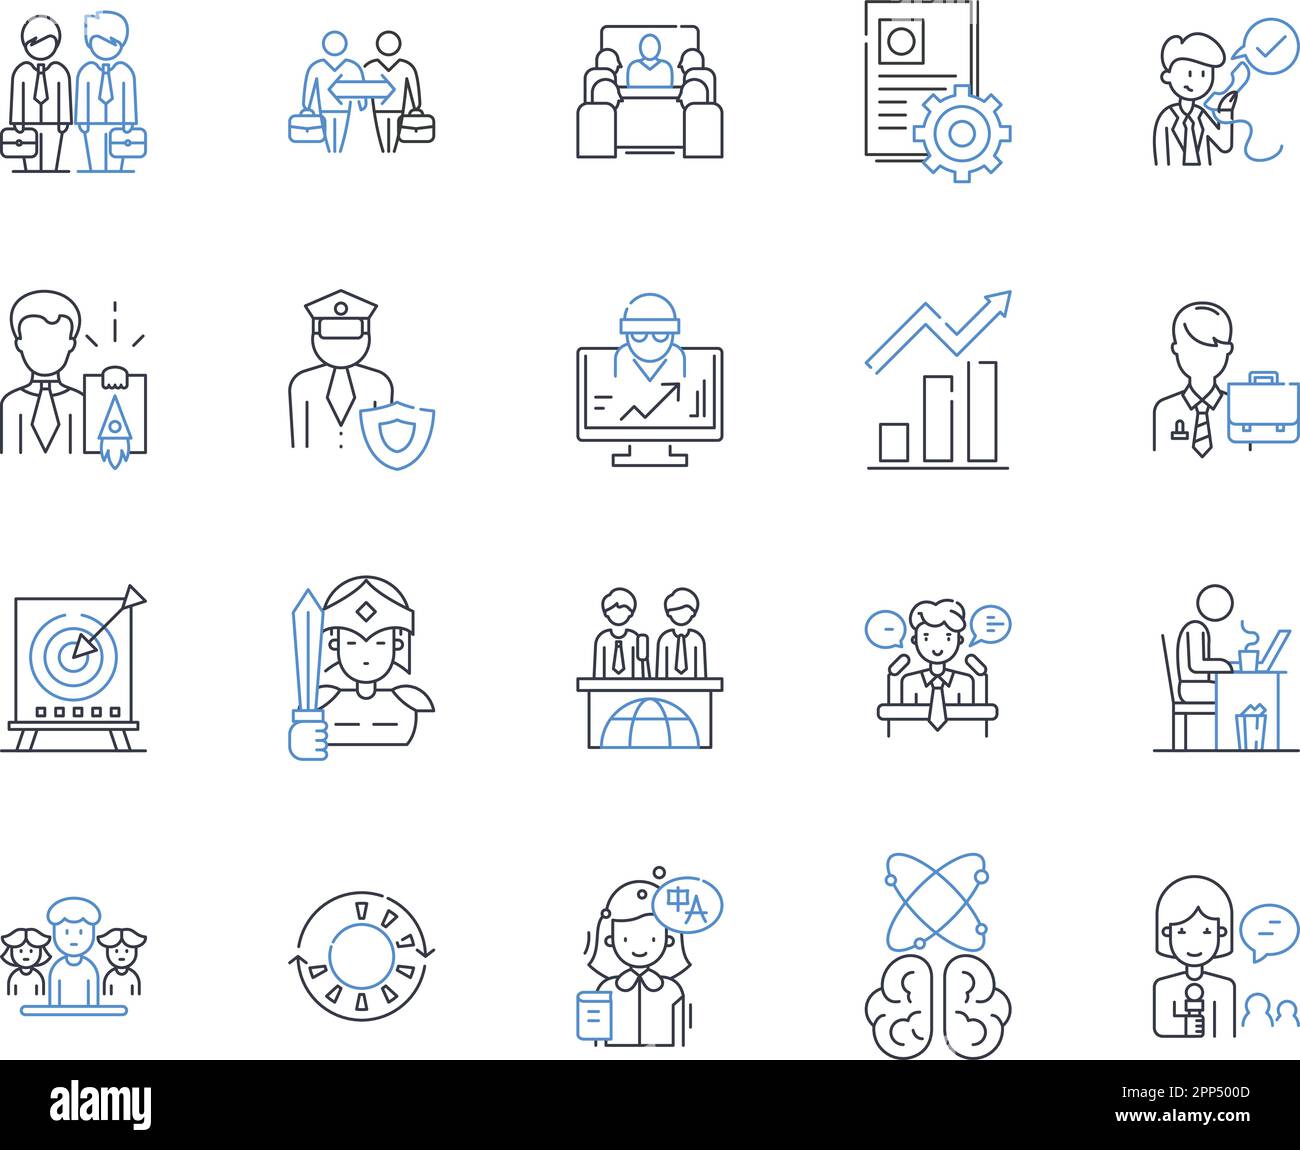 Technical skills line icons collection. Programming, Nerking, Troubleshooting, Cybersecurity, Cloud computing, Analytics, Automation vector and linear Stock Vector